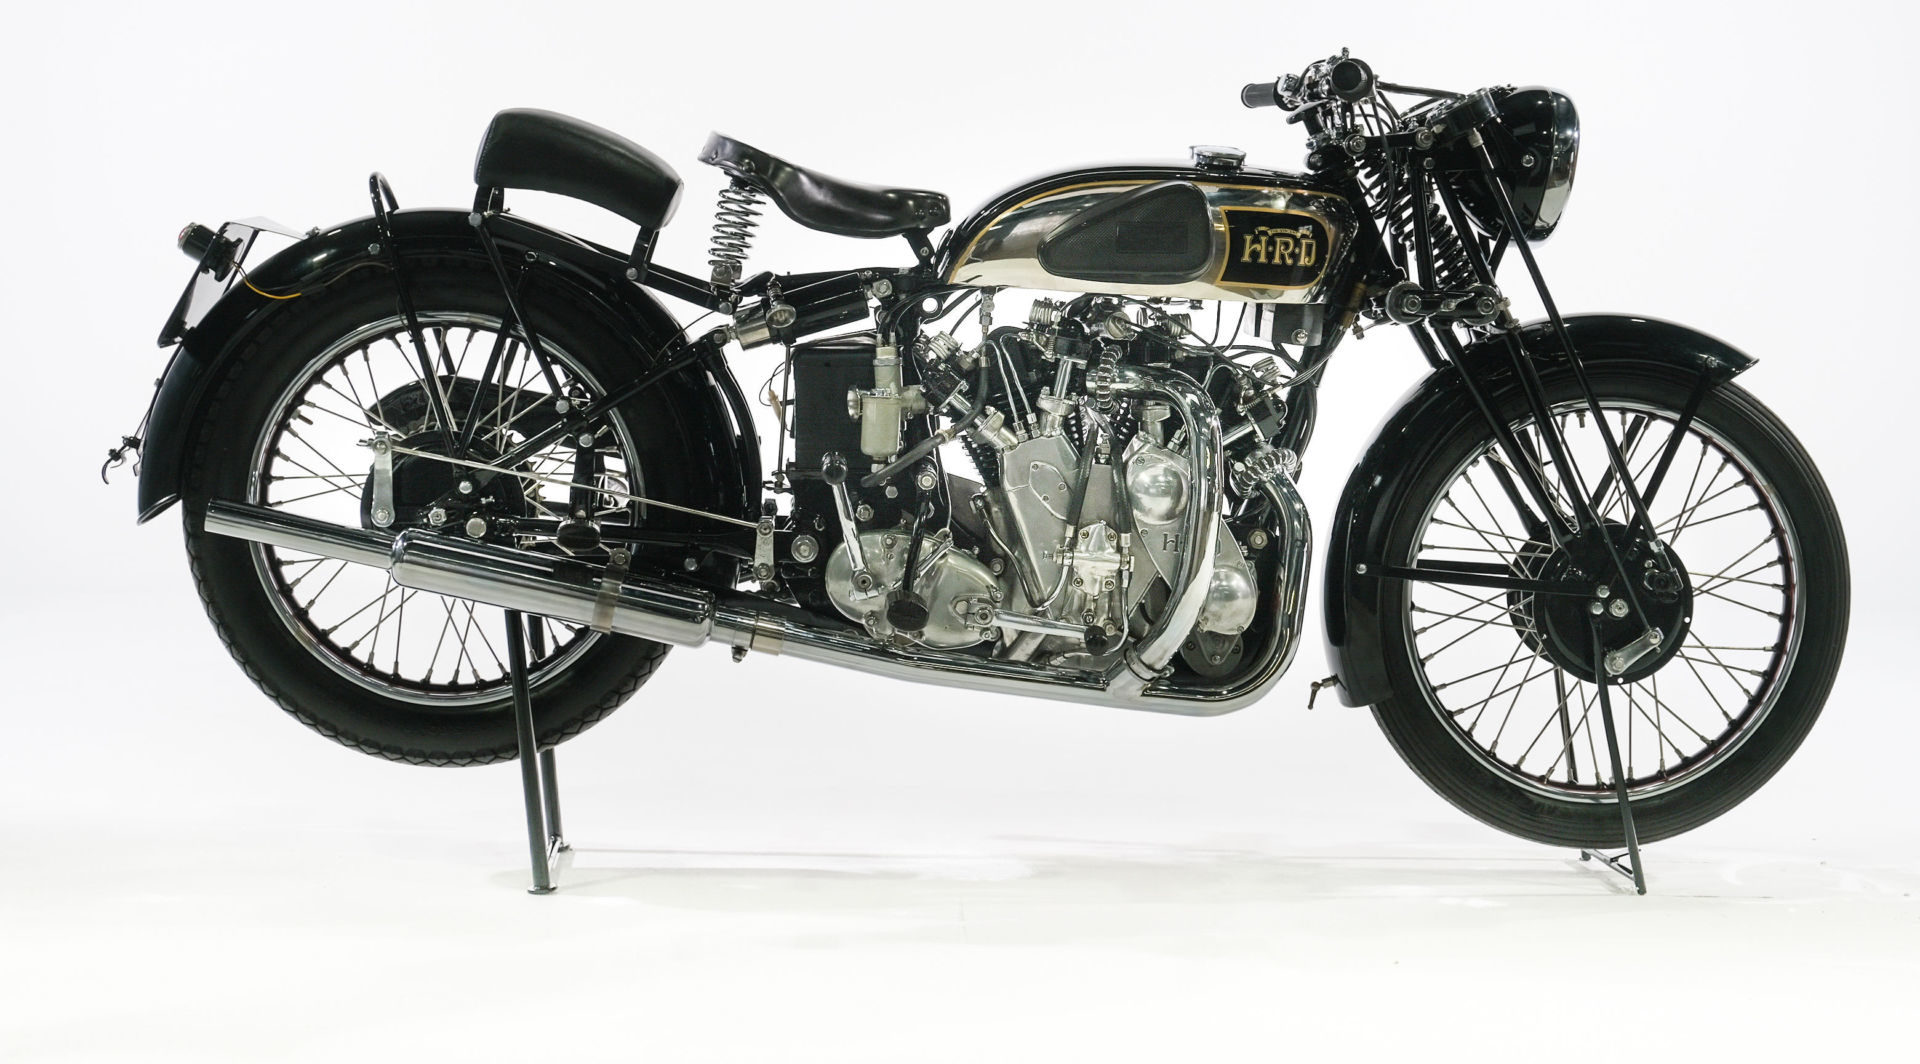 This restored 1938 Vincent-HRD Series A Rapide is going up for auction Friday, April 30 in Las Vegas. Photo courtesy Liquid Asset Partners.